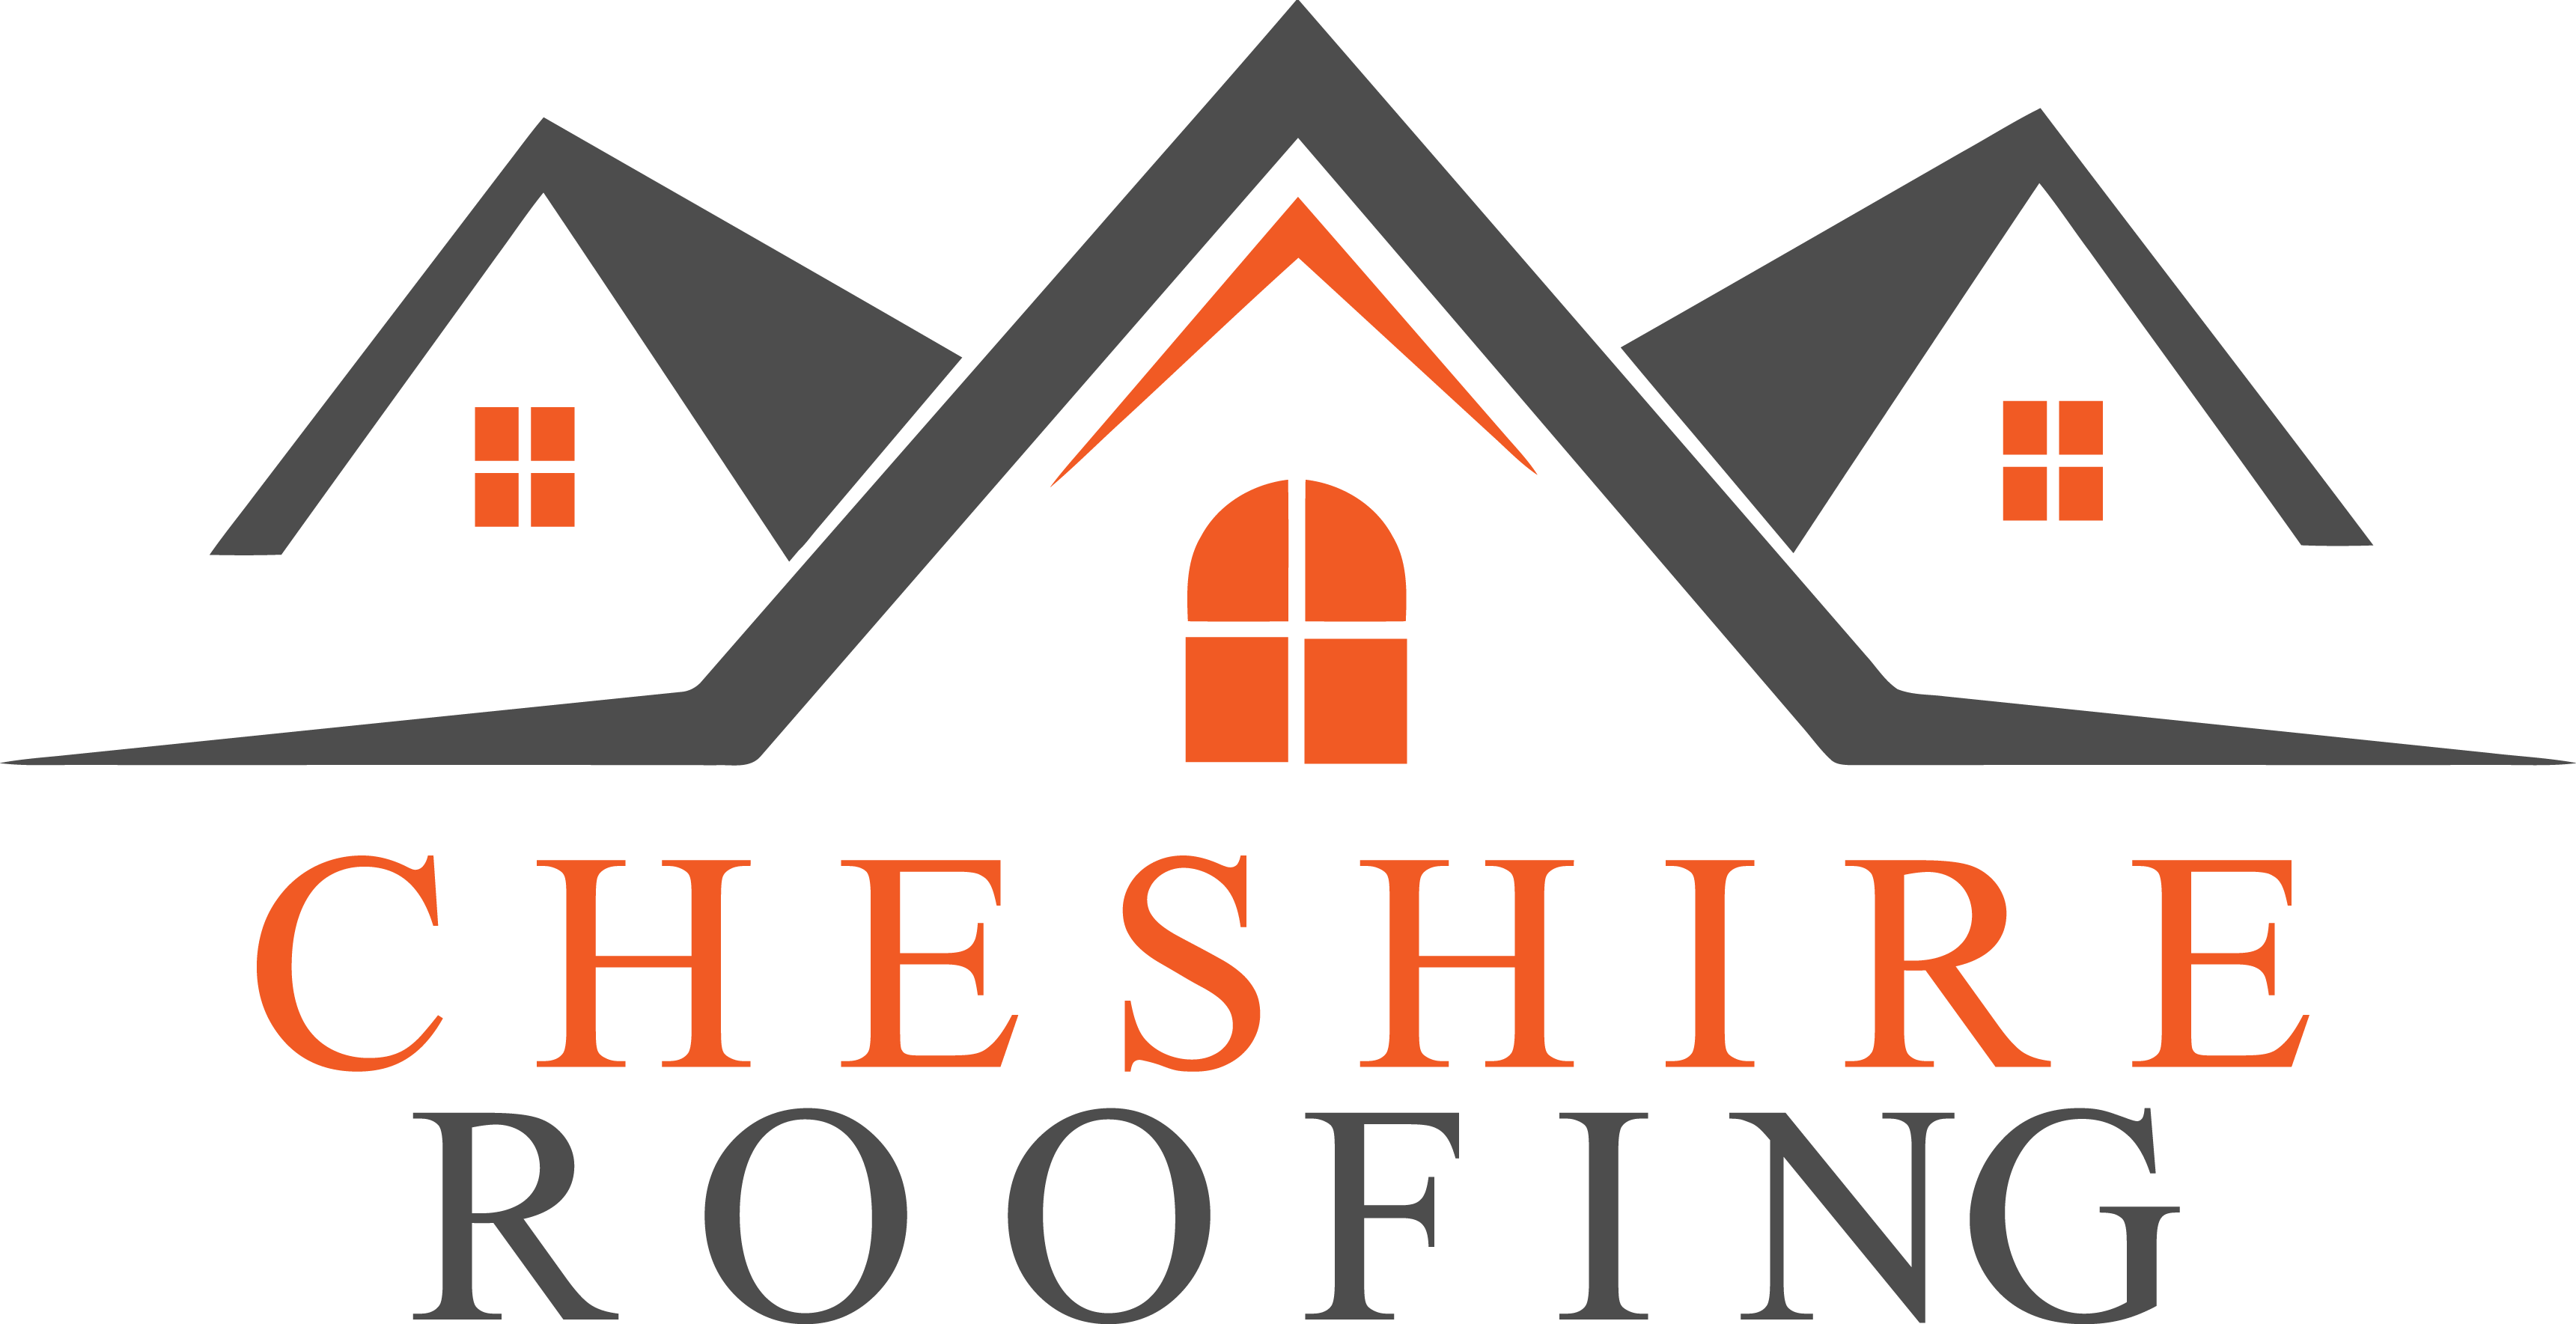 Siding and Roofing Construction Company Logo Template - Edit Online &  Download Example | Template.net